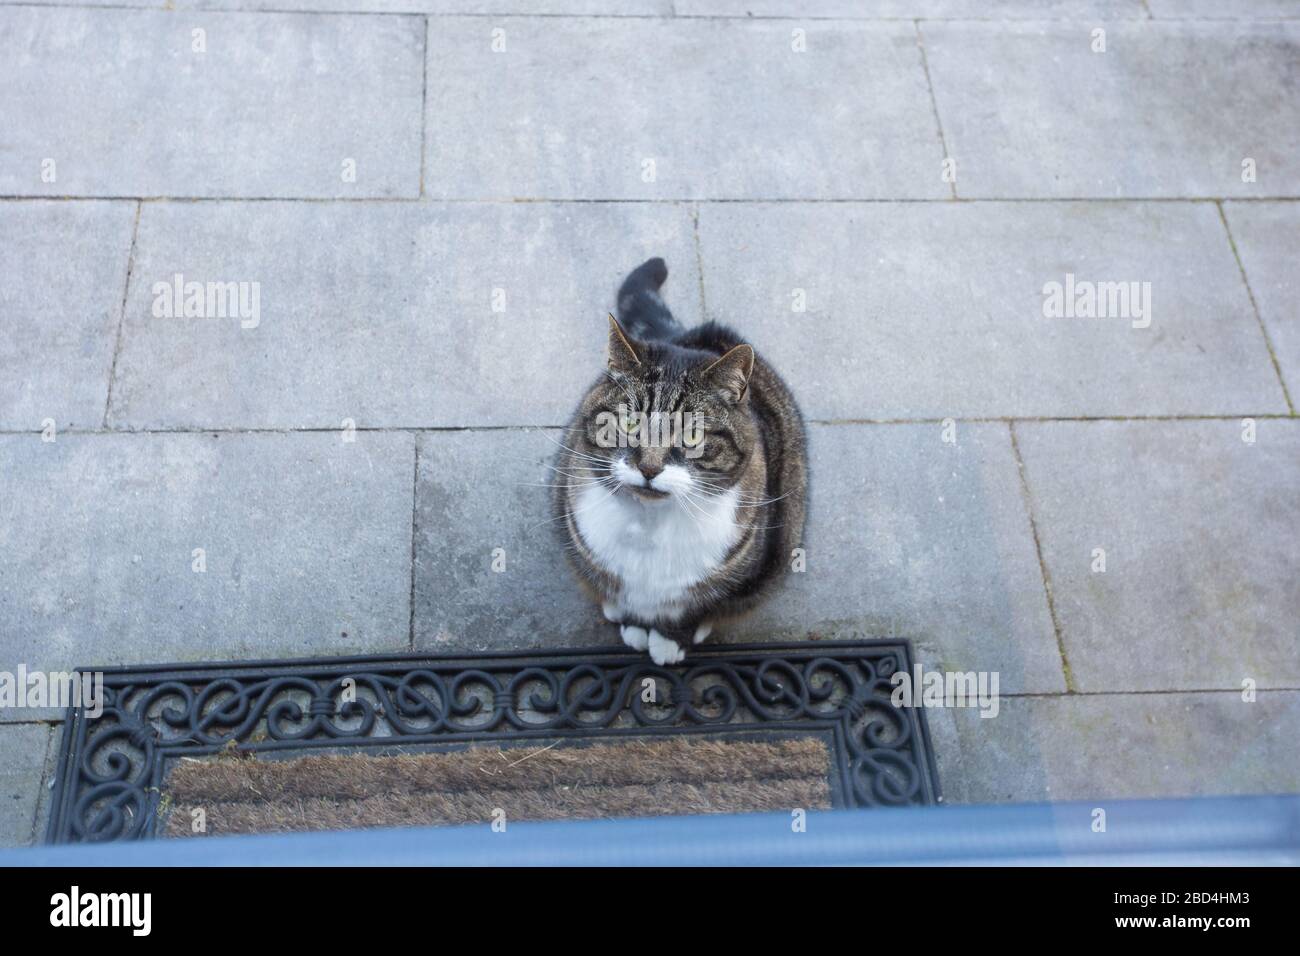 Striped Grey And White Cat In The Doorway Stock Photo, Picture and